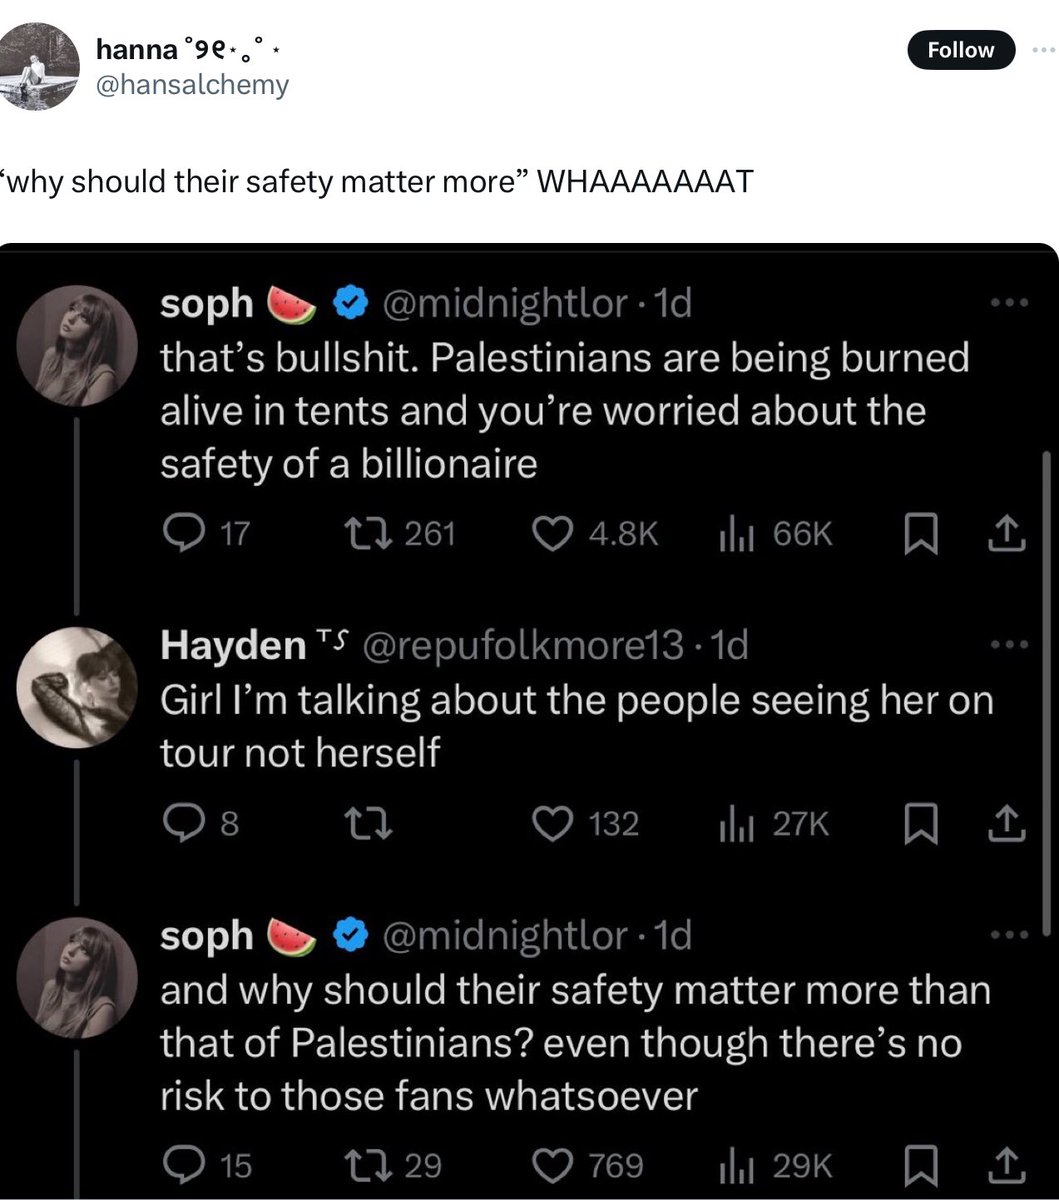 i will explain this ONCE because some of you are extremely dense.

NOWHERE did i say that fans’ lives “matter less”. basic comprehension tells you that i am saying that fans’ lives should *not be valued OVER Palestinian lives because *all lives are equally worthy and Palestinian